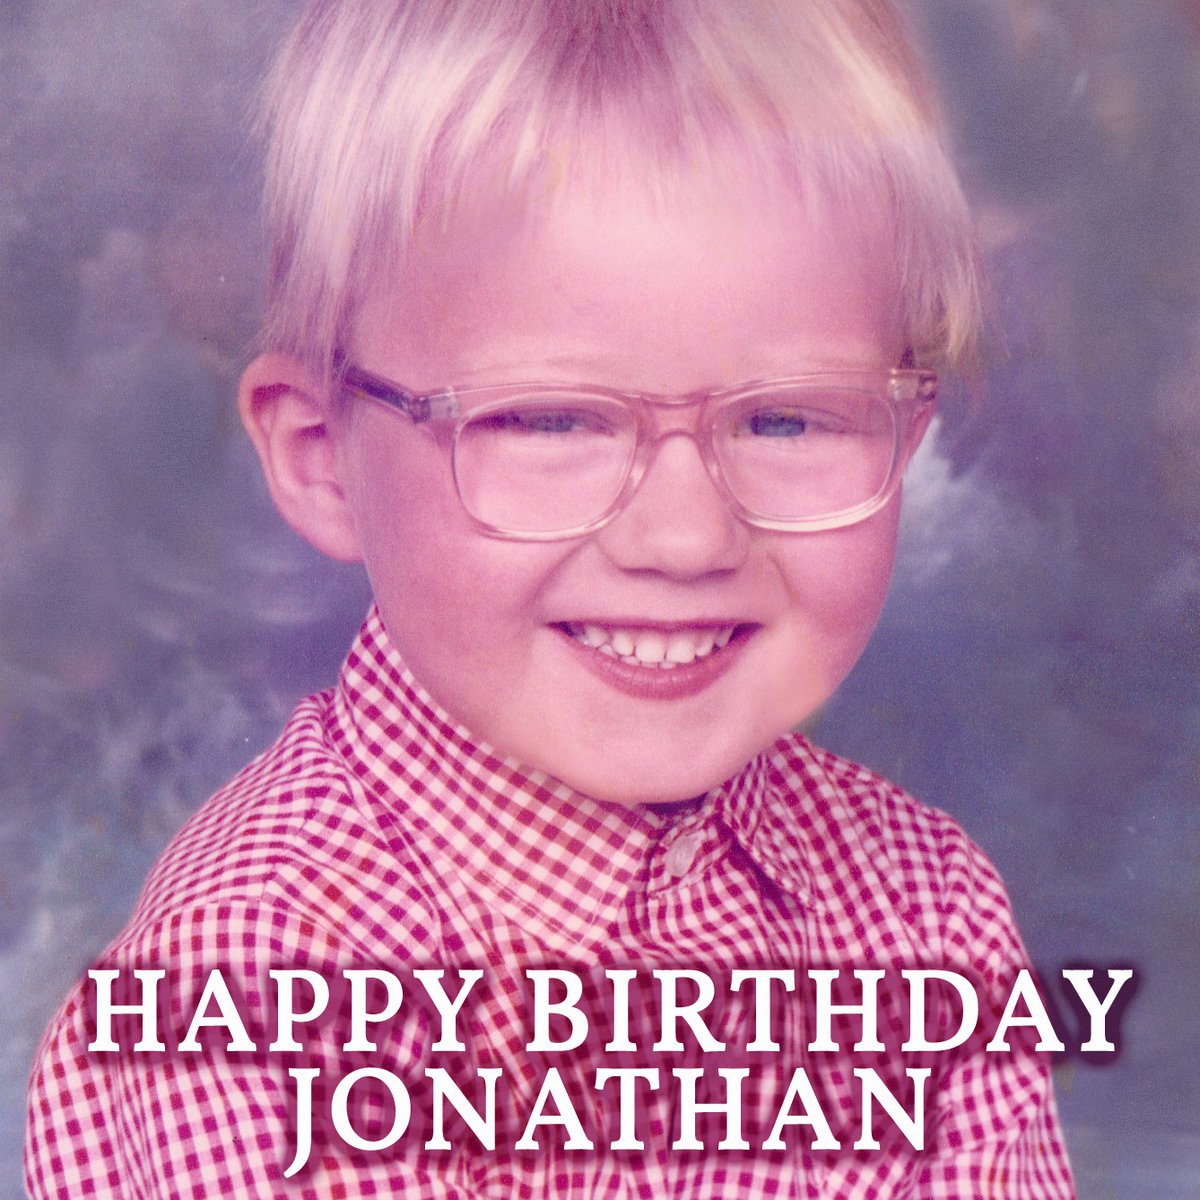 HAPPY BIRTHDAY JONATHAN! As you can see, Jonathan has always been a trendsetter for organists!!!